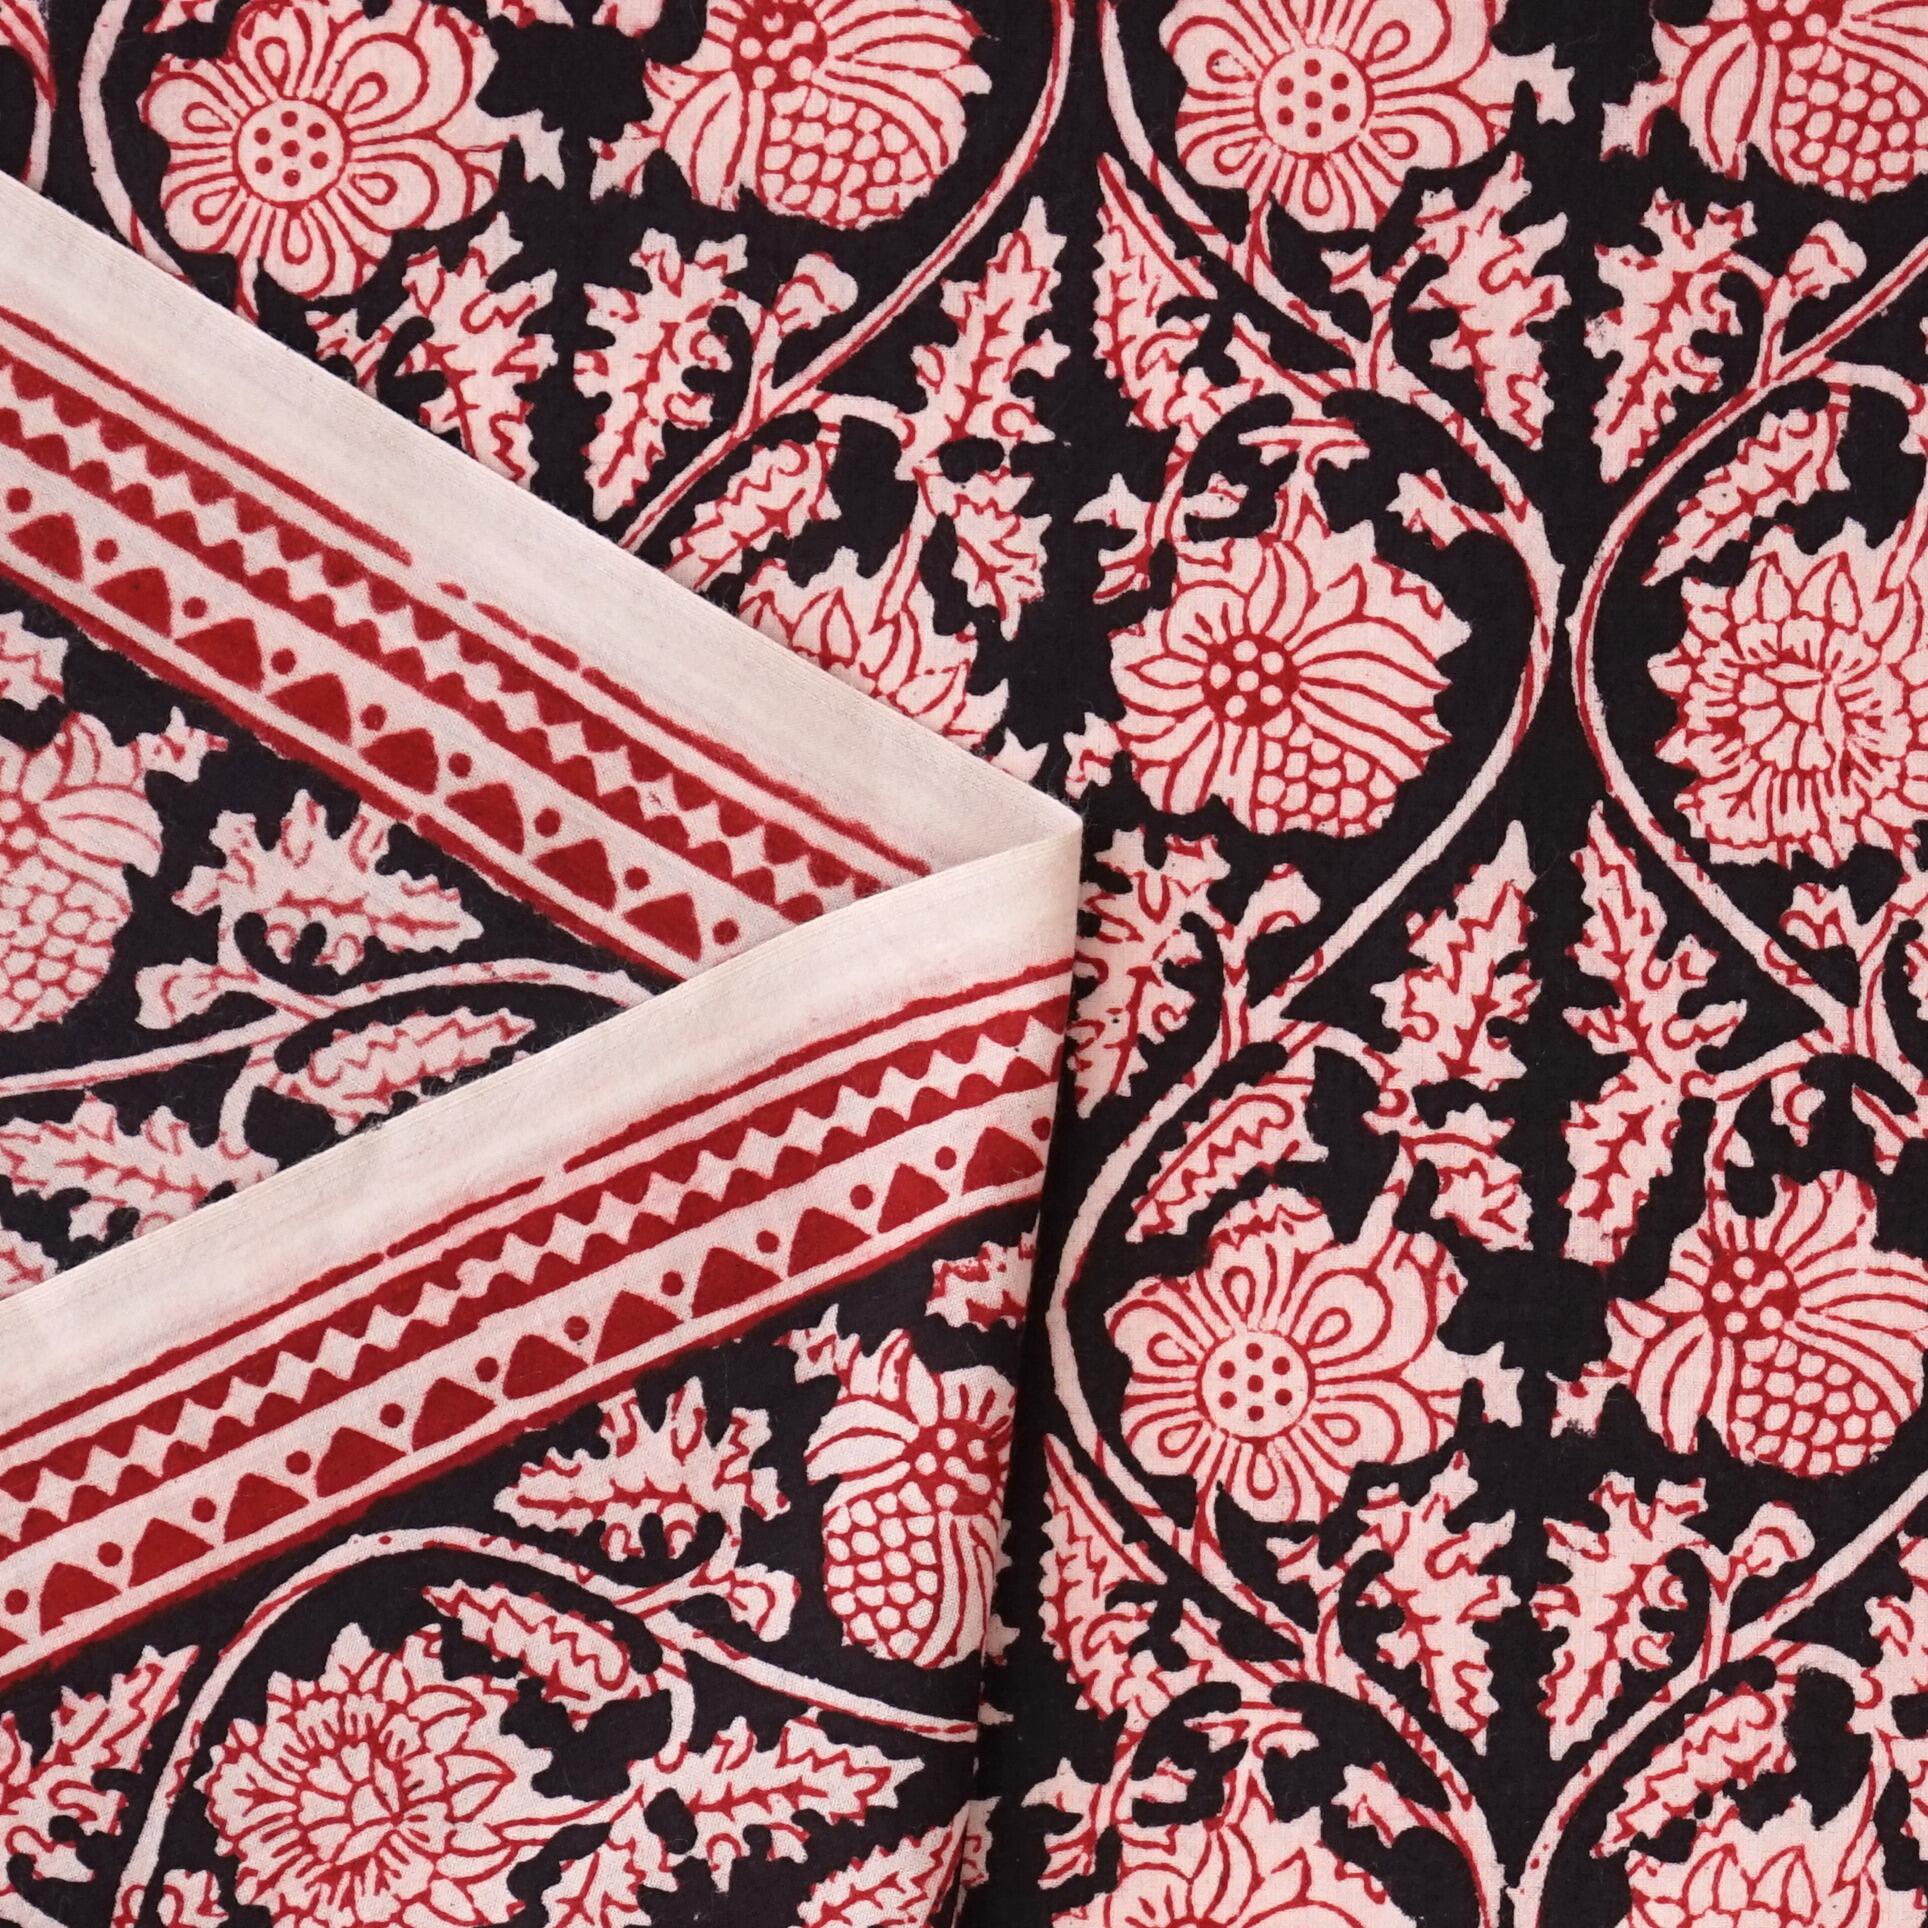 100% Block-Printed Cotton Fabric From India - Vinea Design - Iron Rust Black & Alizarin Red Dyes - Selvedge